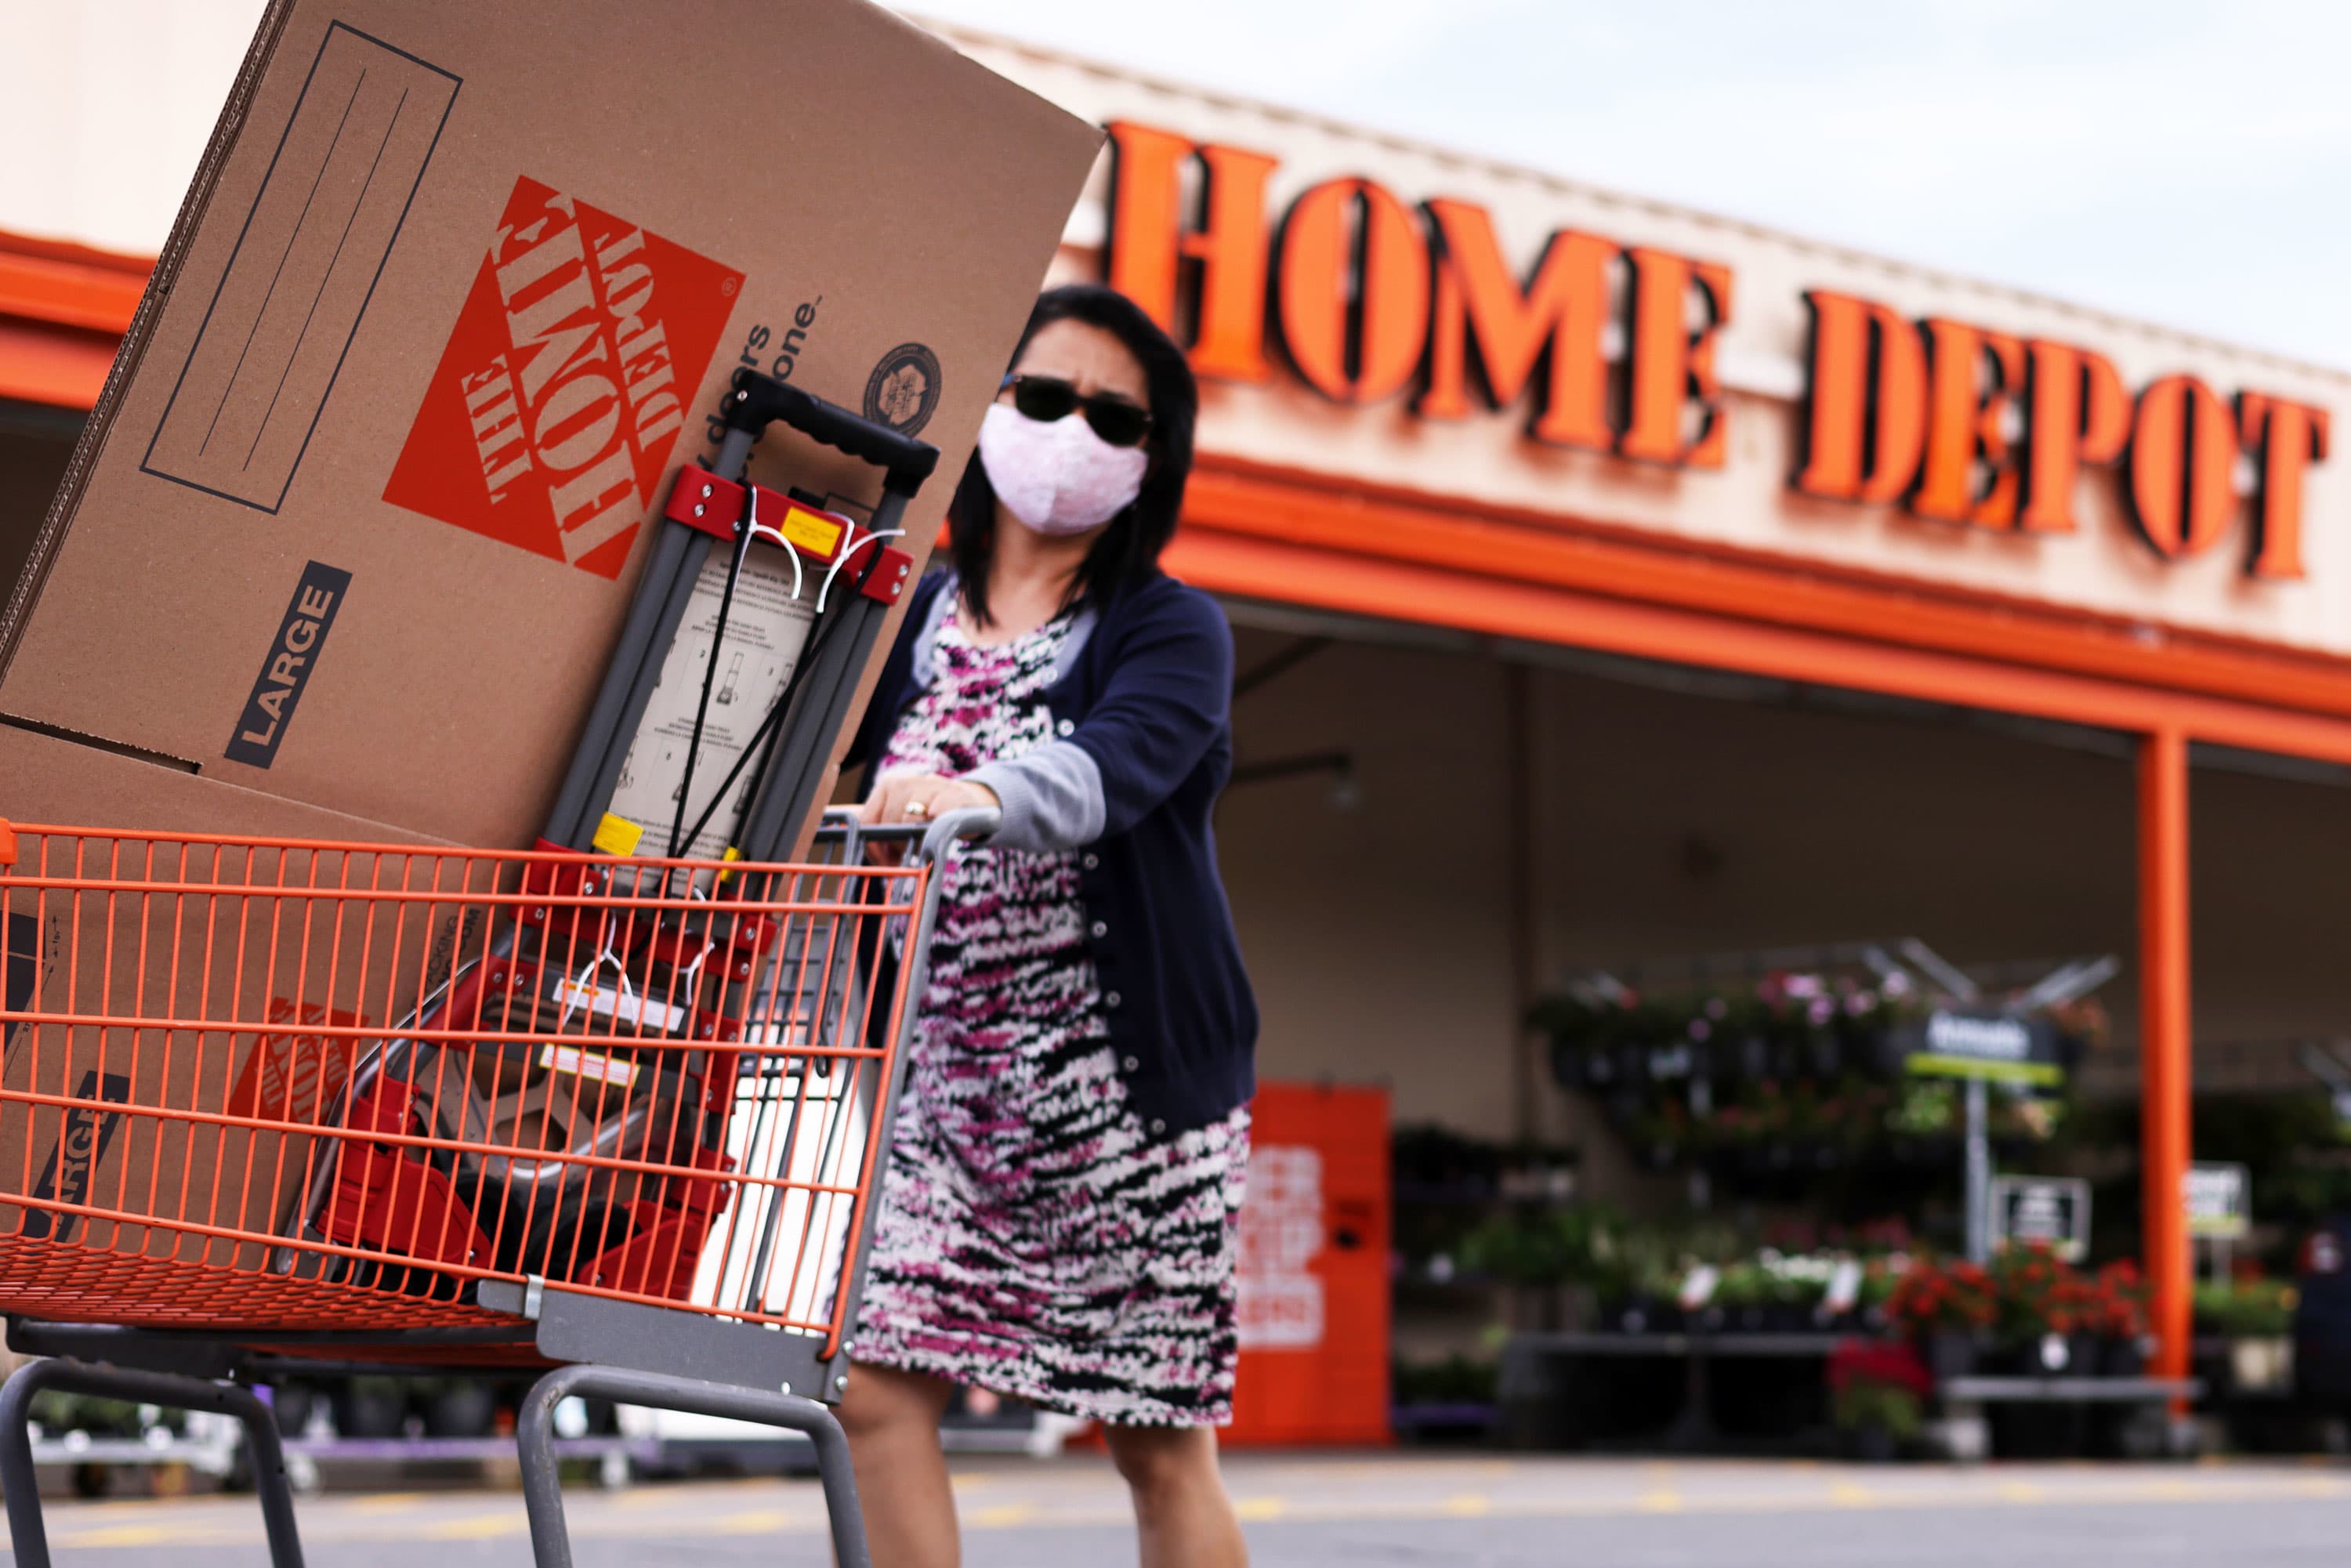 Home Depot beats estimates retailer says it sees sales growth ahead for 2022 – CNBC